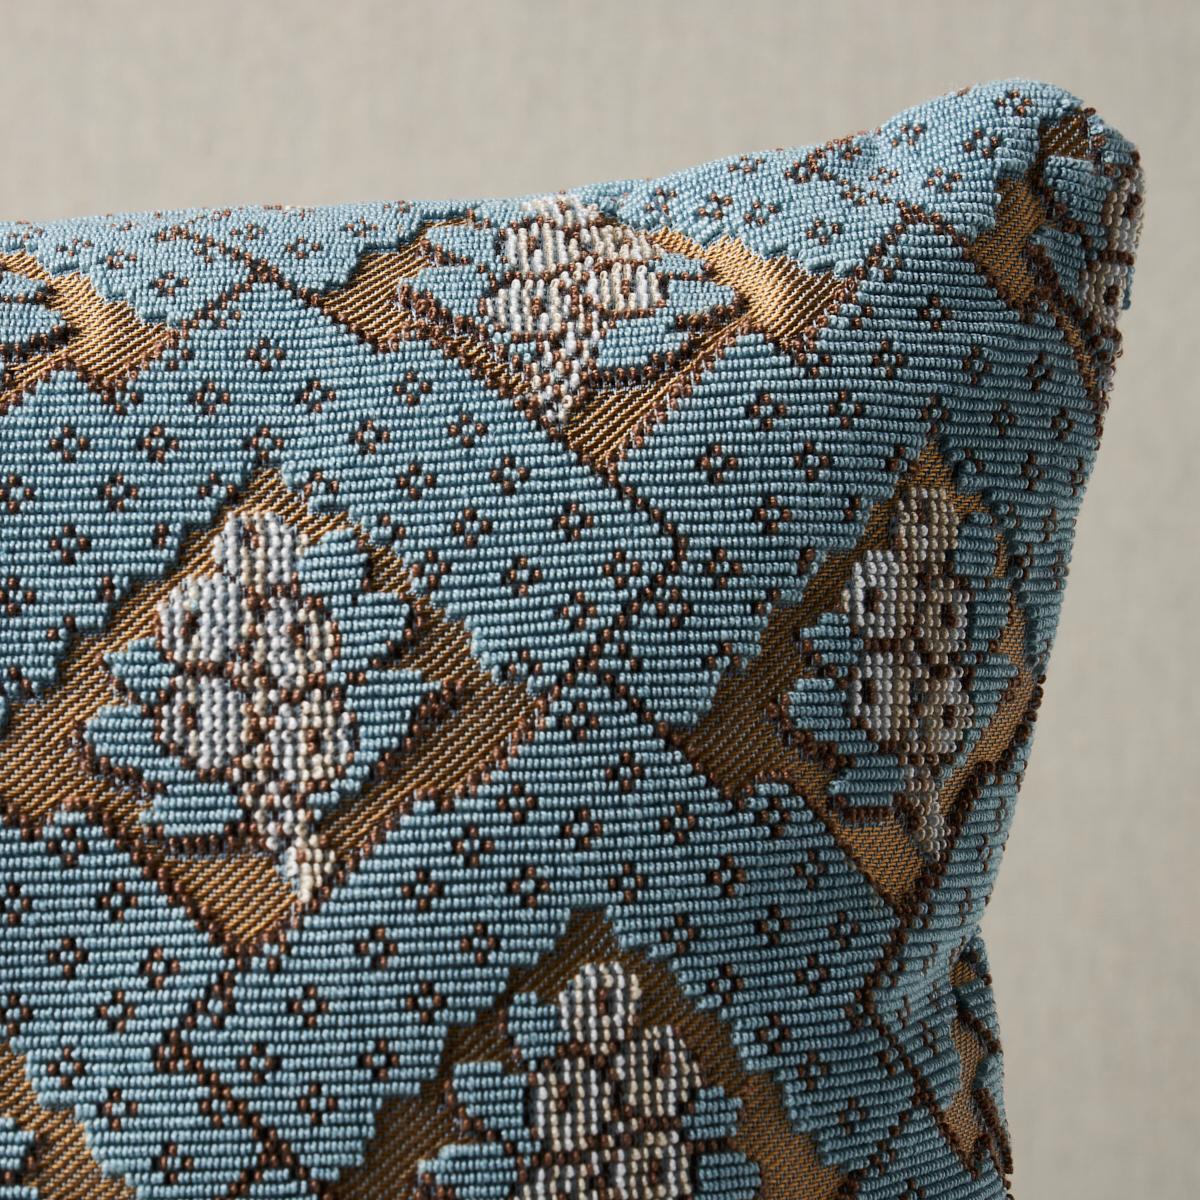 This pillow features Blair Silk Épinglé with a knife edge finish. A truly extraordinary velvet derived from a fragment of an 18th-century men's suit worn in Williamsburg, Worcester blue-colored Blair Silk Epinglé features a unique textural pattern